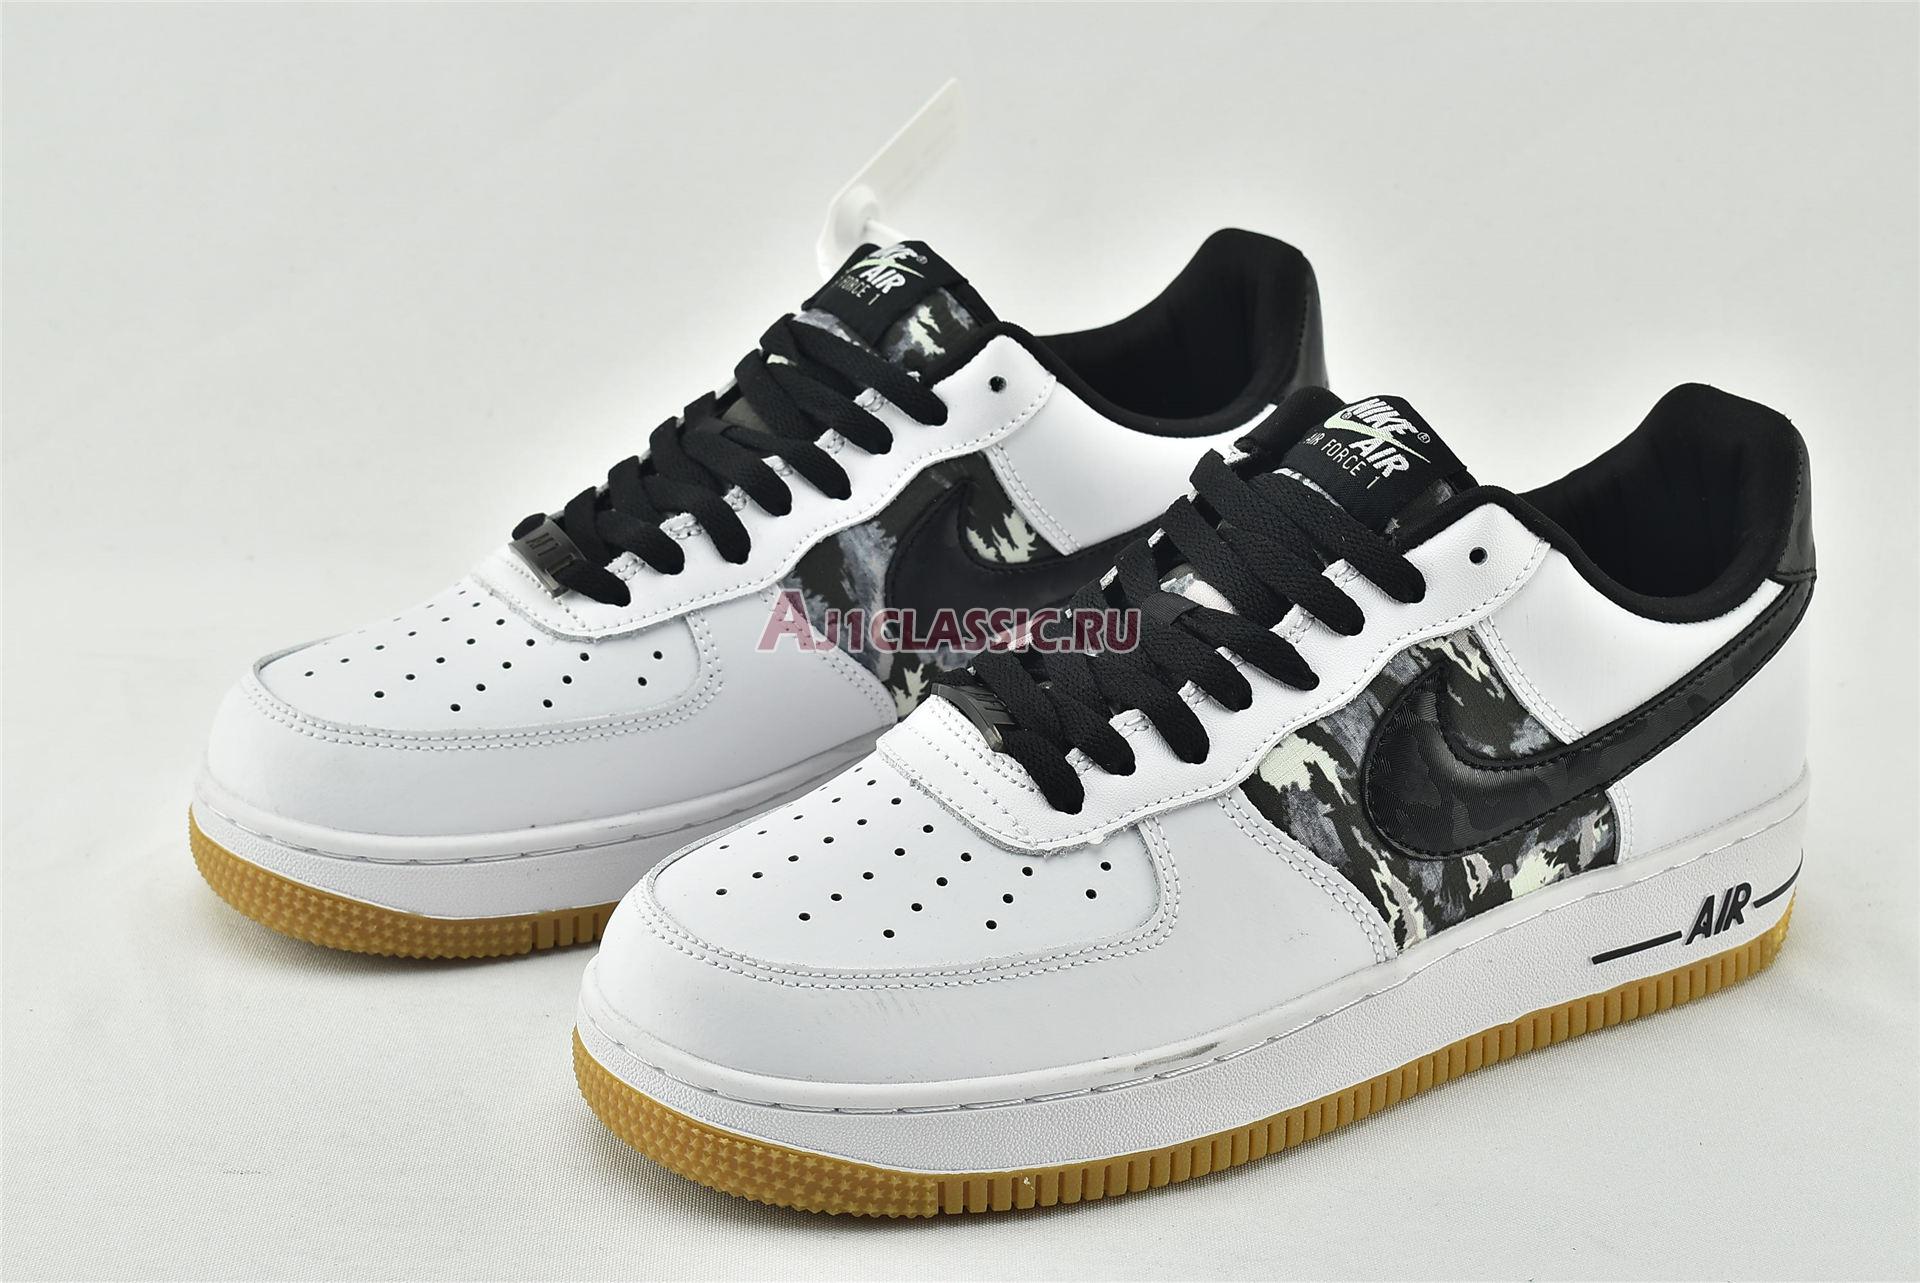 Nike Air Force 1 07 LV8 "Pacific Northwest Camo" CZ7891-100